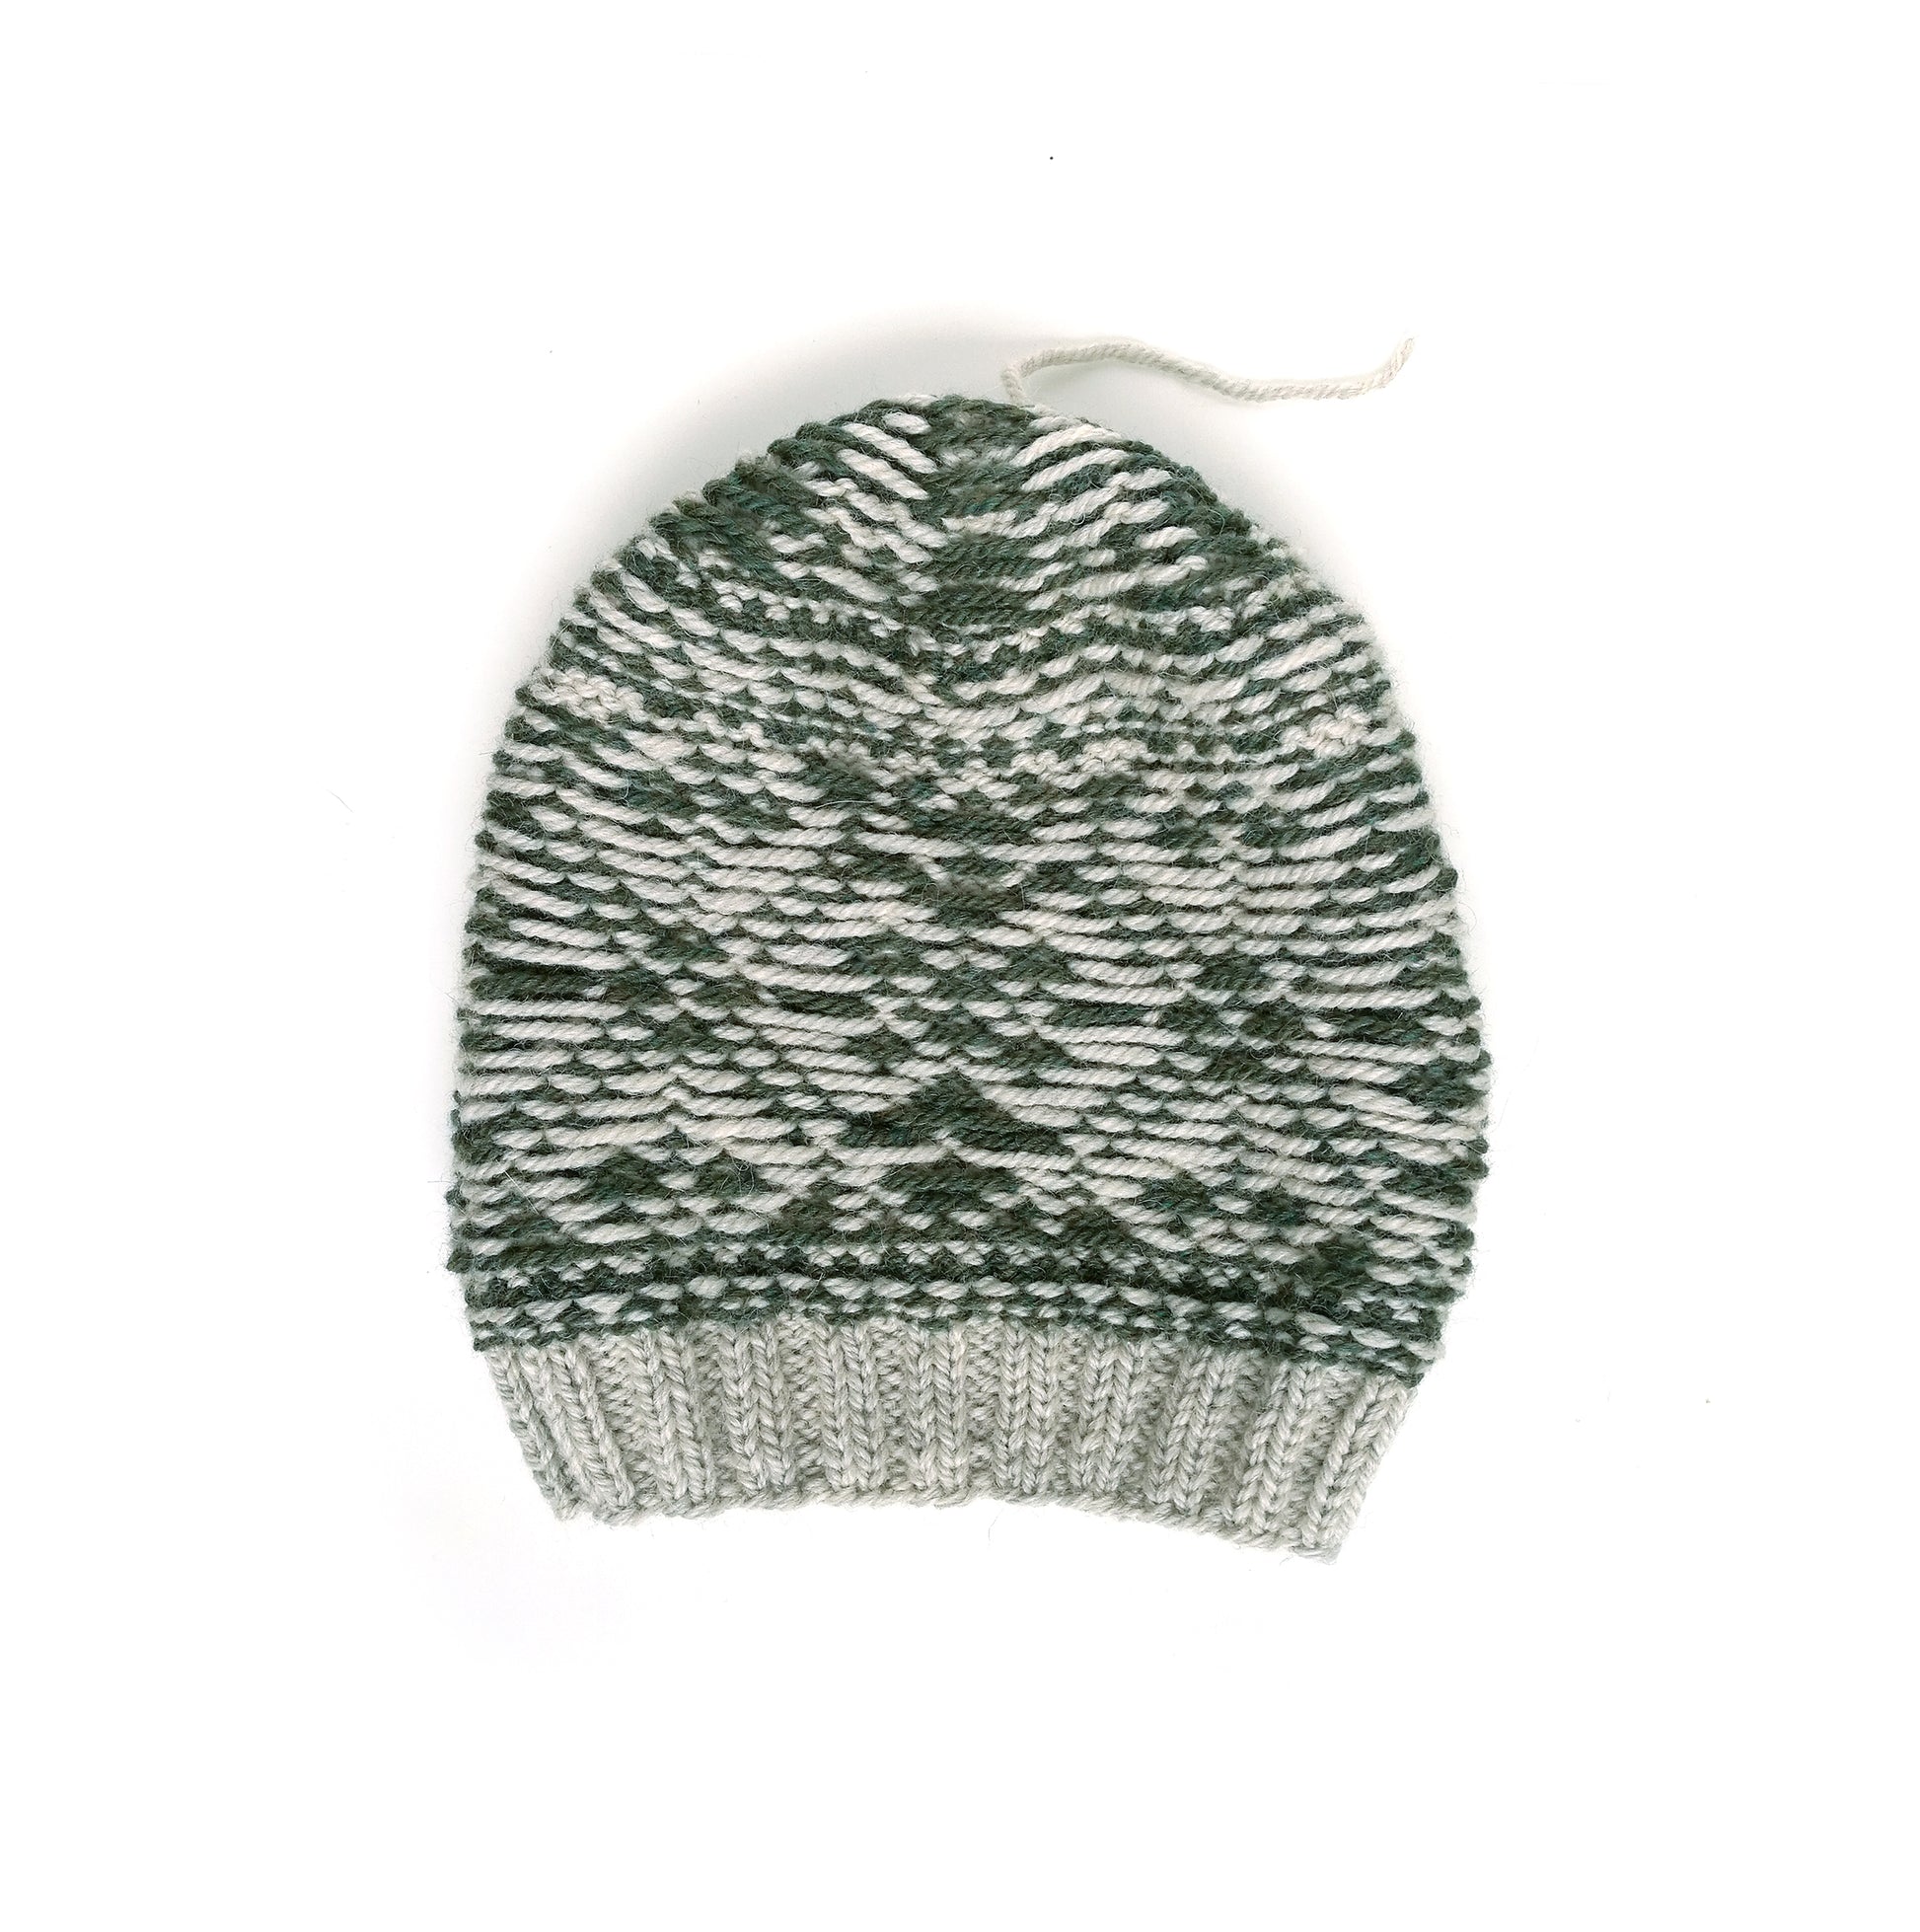 beige and green wool hand-knitted Fair Isle beanie hat in snowflake knitting pattern, wrong side